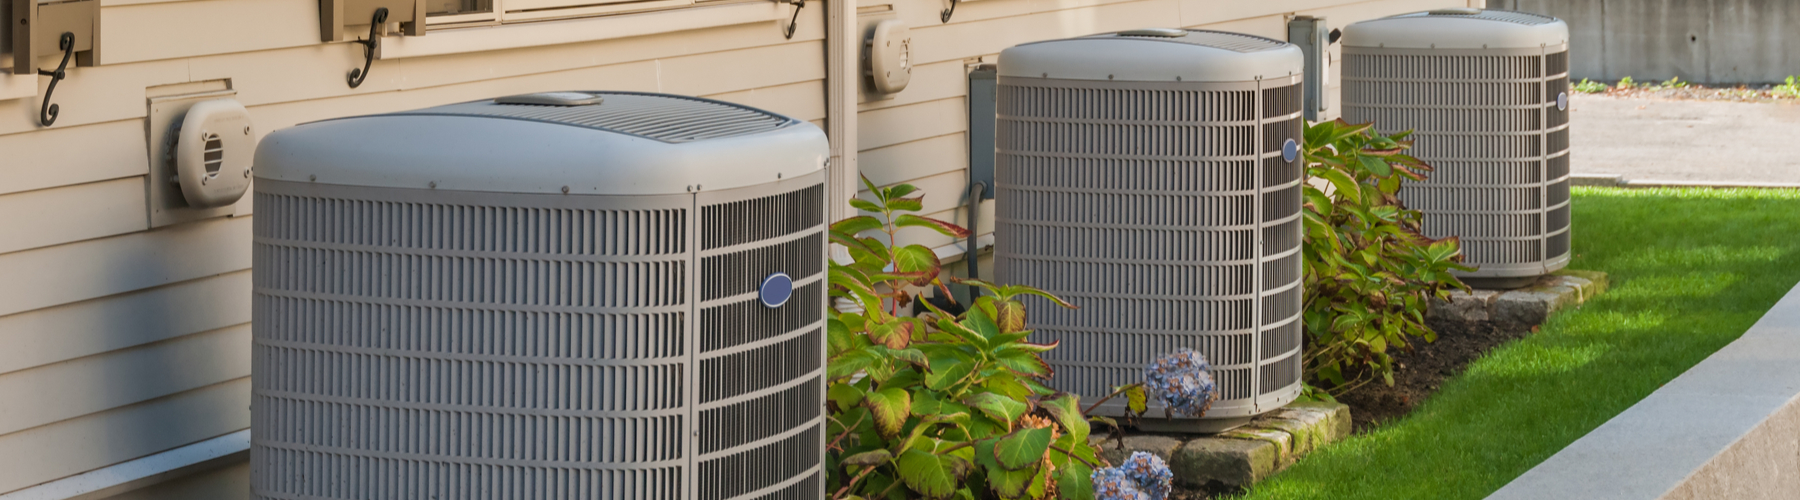 The dos-and-don’ts of maintaining your HVAC system